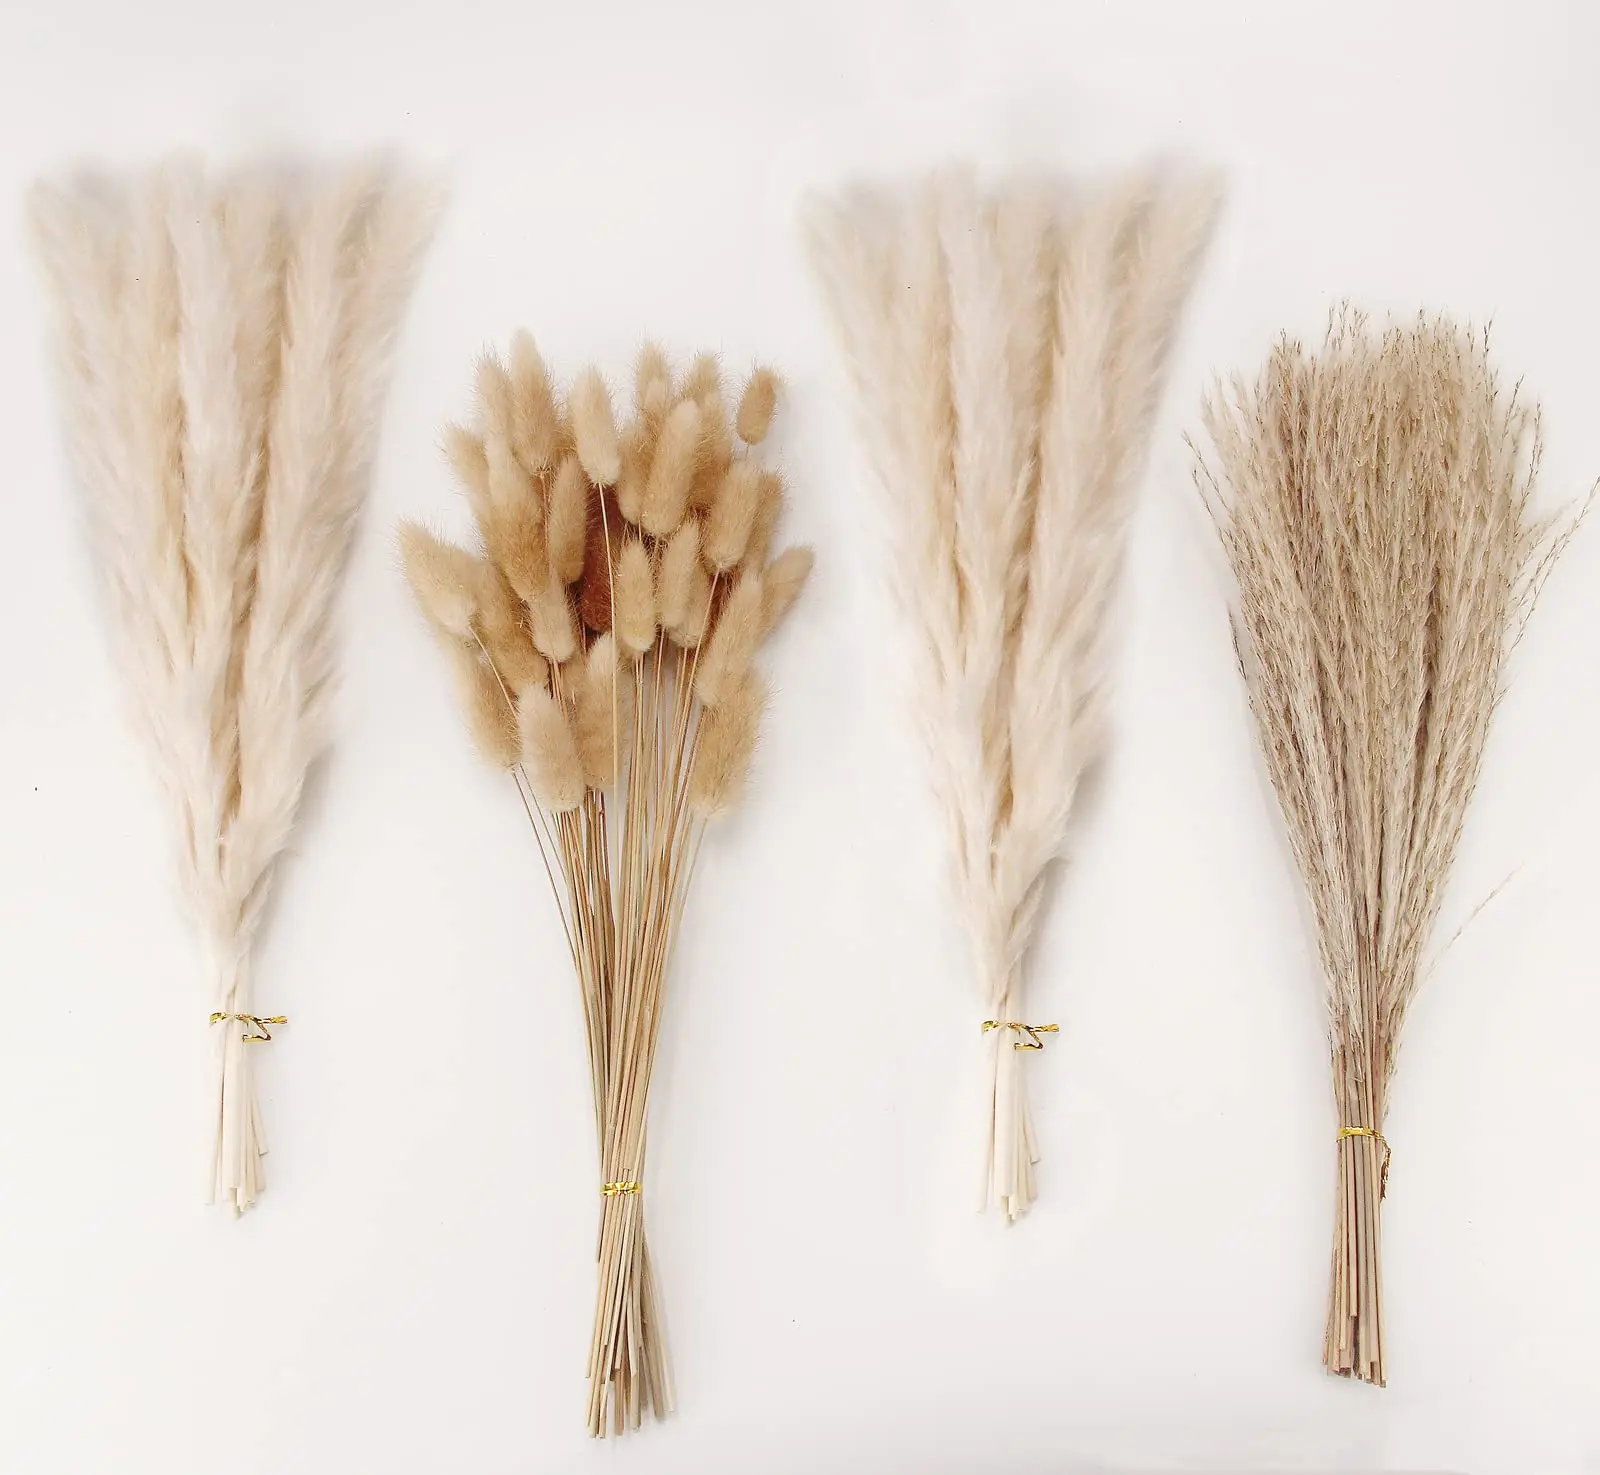 

100PCS Natural Dried White Pampas Grass Bunny Tails Dried Flowers,Reed Bouquet for Rustic Wedding Boho Flowers Home Table Decor